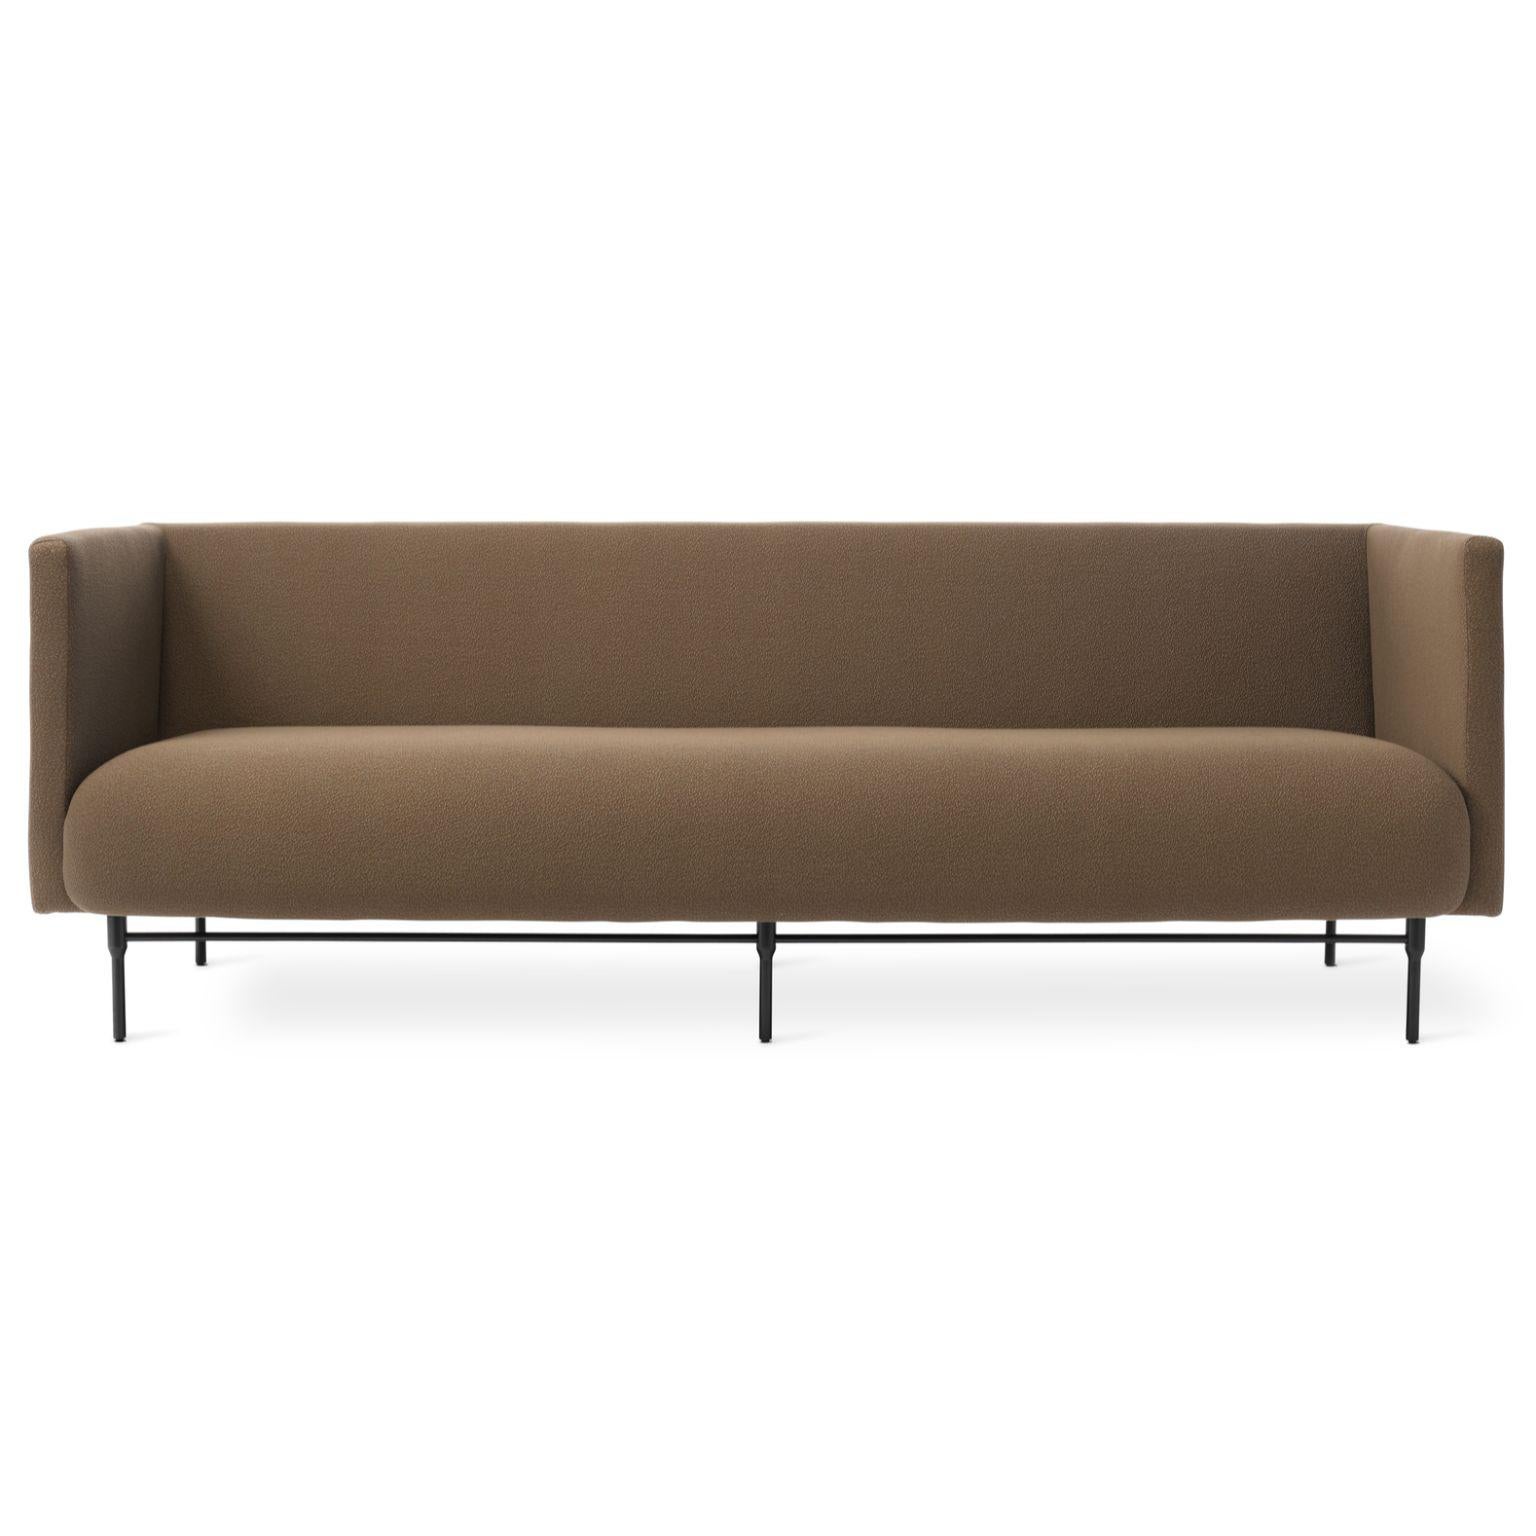 Galore 3 seater Sprinkles Cappuccino brown by Warm Nordic
Dimensions: D222 x W83 x H 76 cm
Material: Textile upholstery, Powder coated black steel legs, Wooden frame, foam, spring system.
Weight: 62 kg
Also available in different colours and